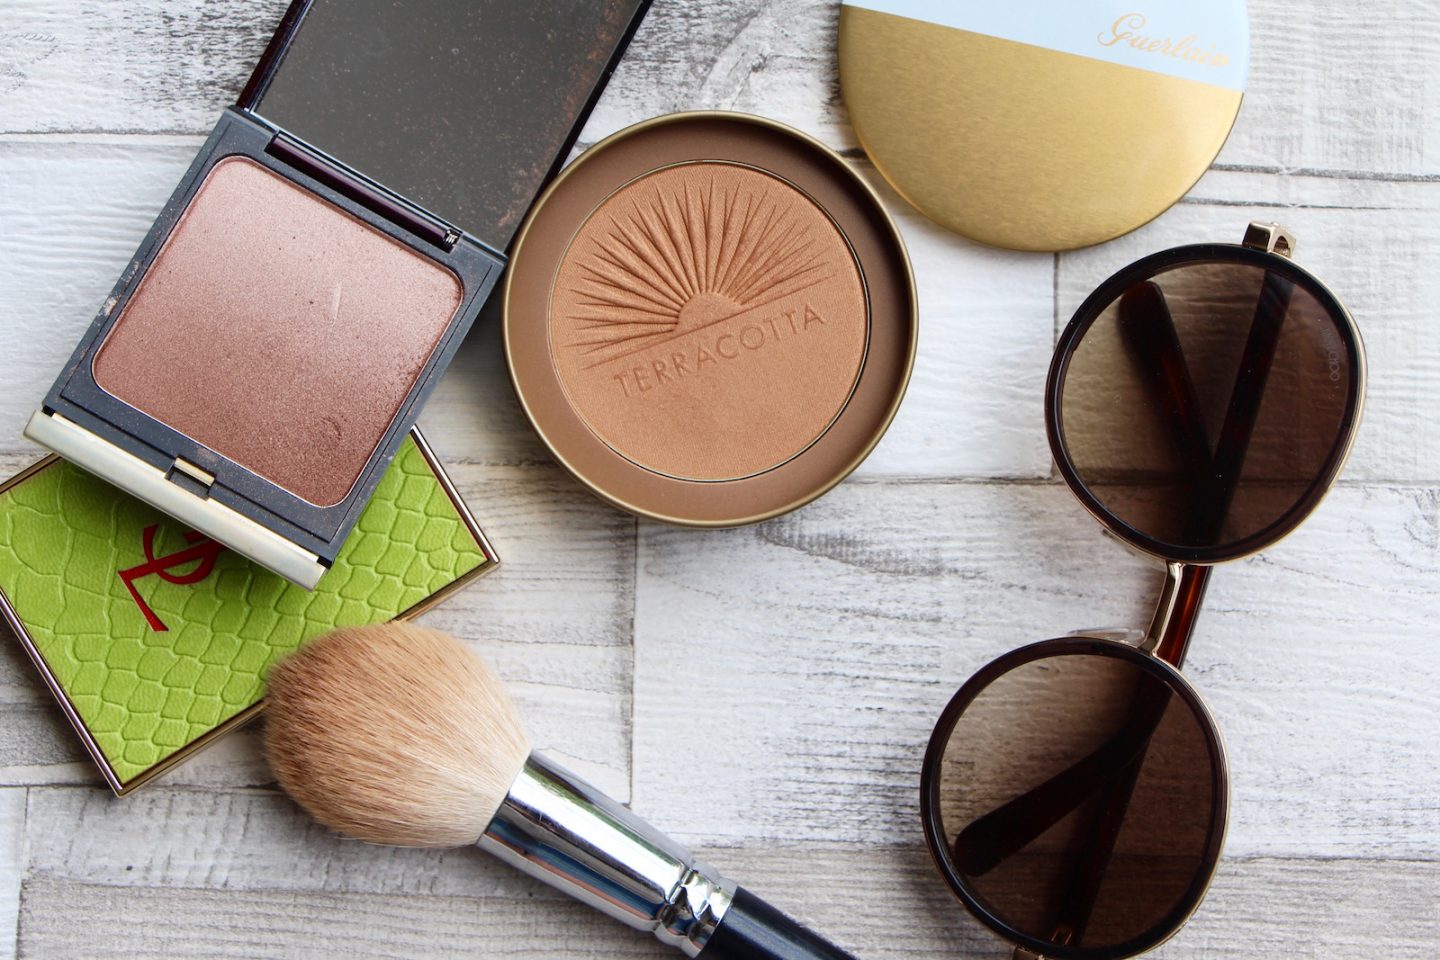 Ranking the best facial bronzers in 2022